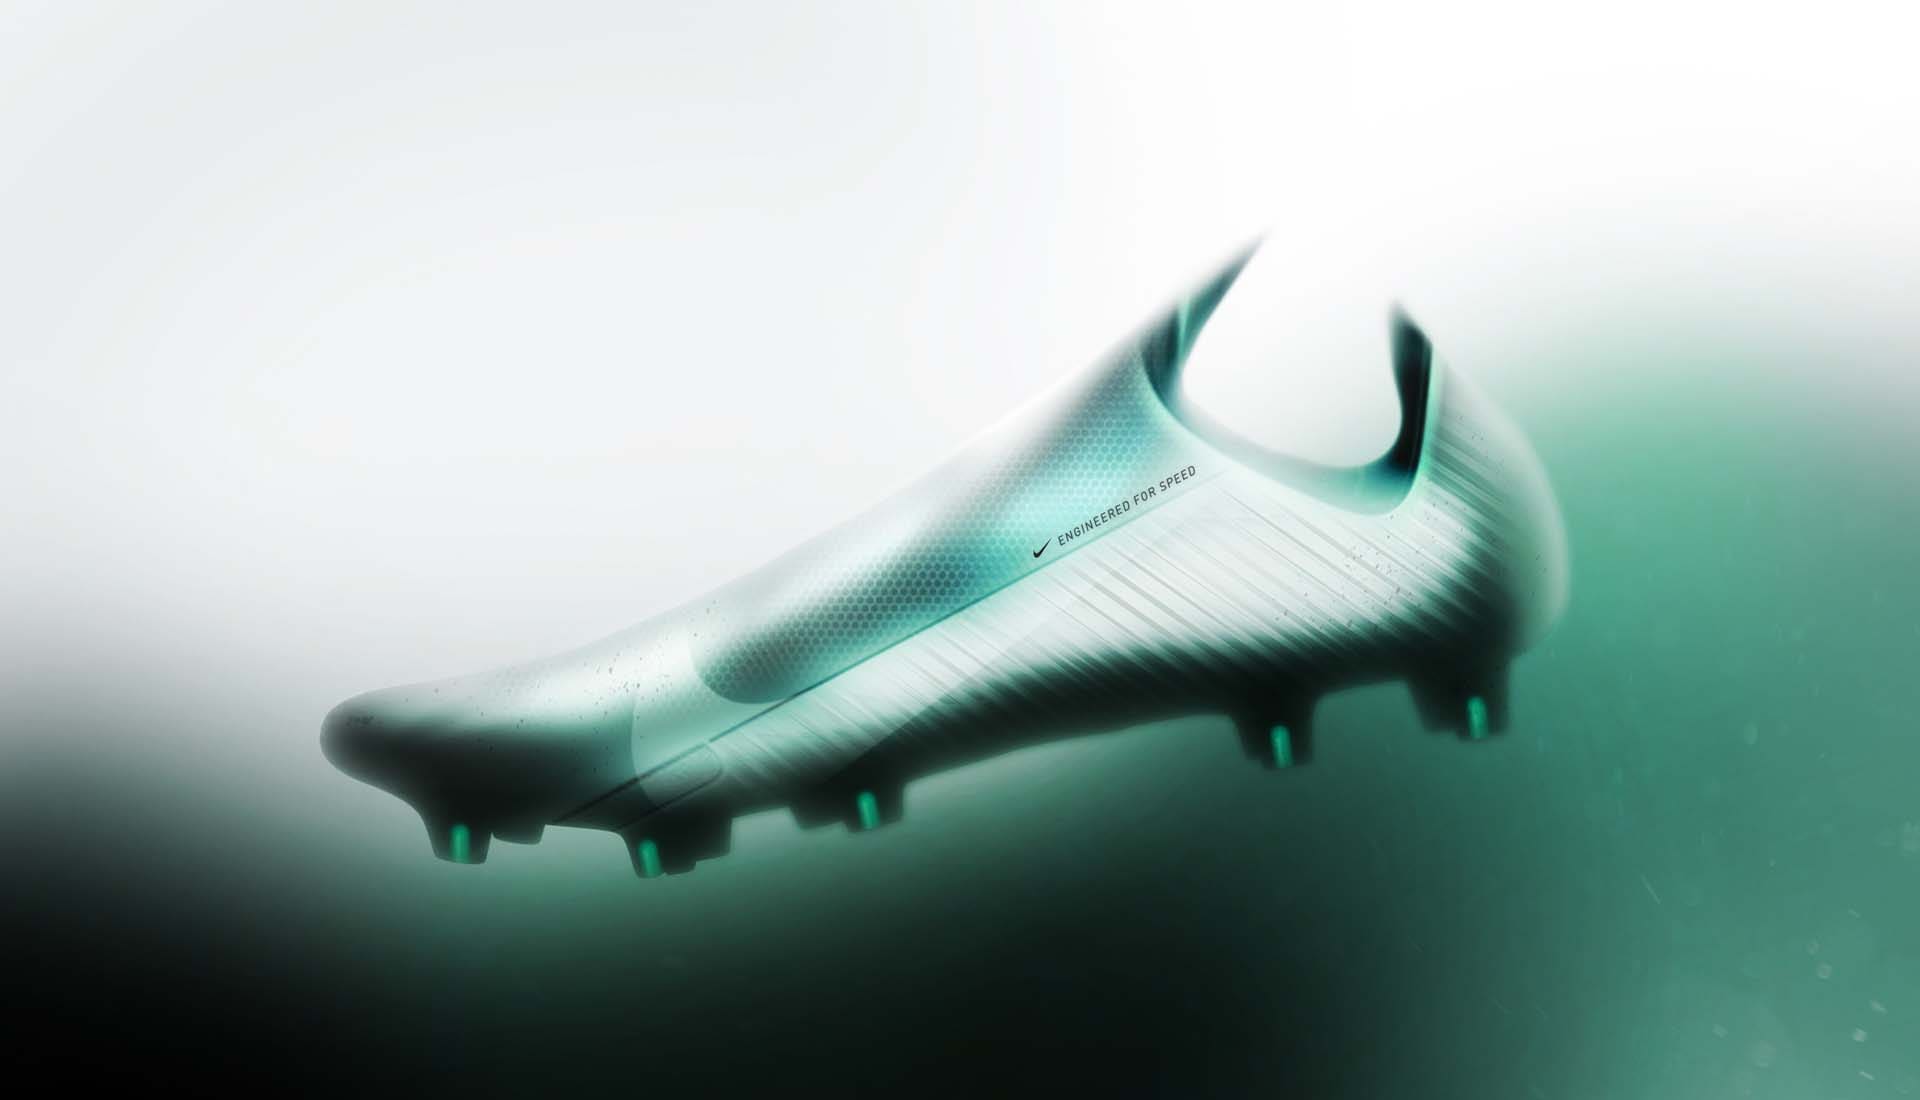 Product Designer Mossawi Creates 2 Nike Concept Boots - SoccerBible